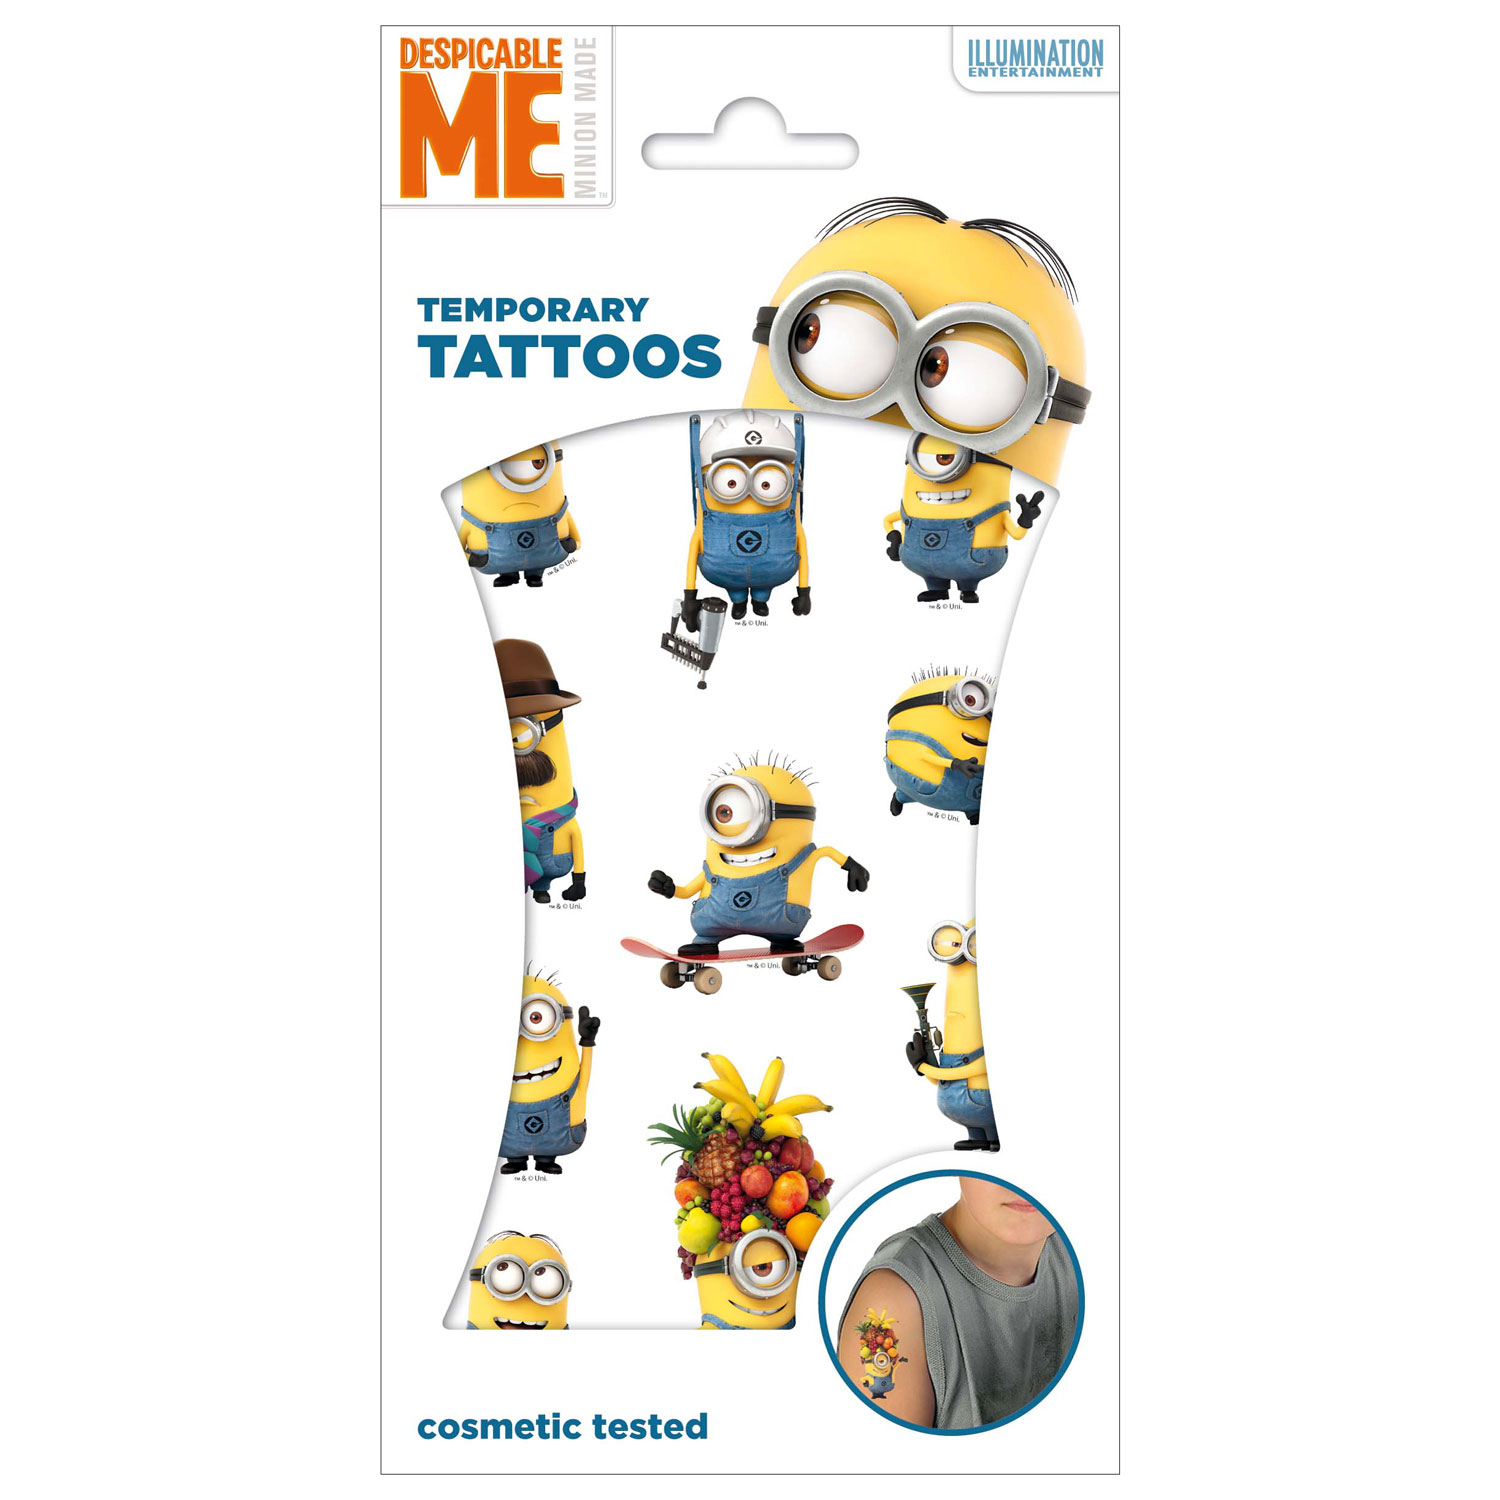 Despicable Me Minions Temporary Tattoos 24ct Ship for sale online | eBay